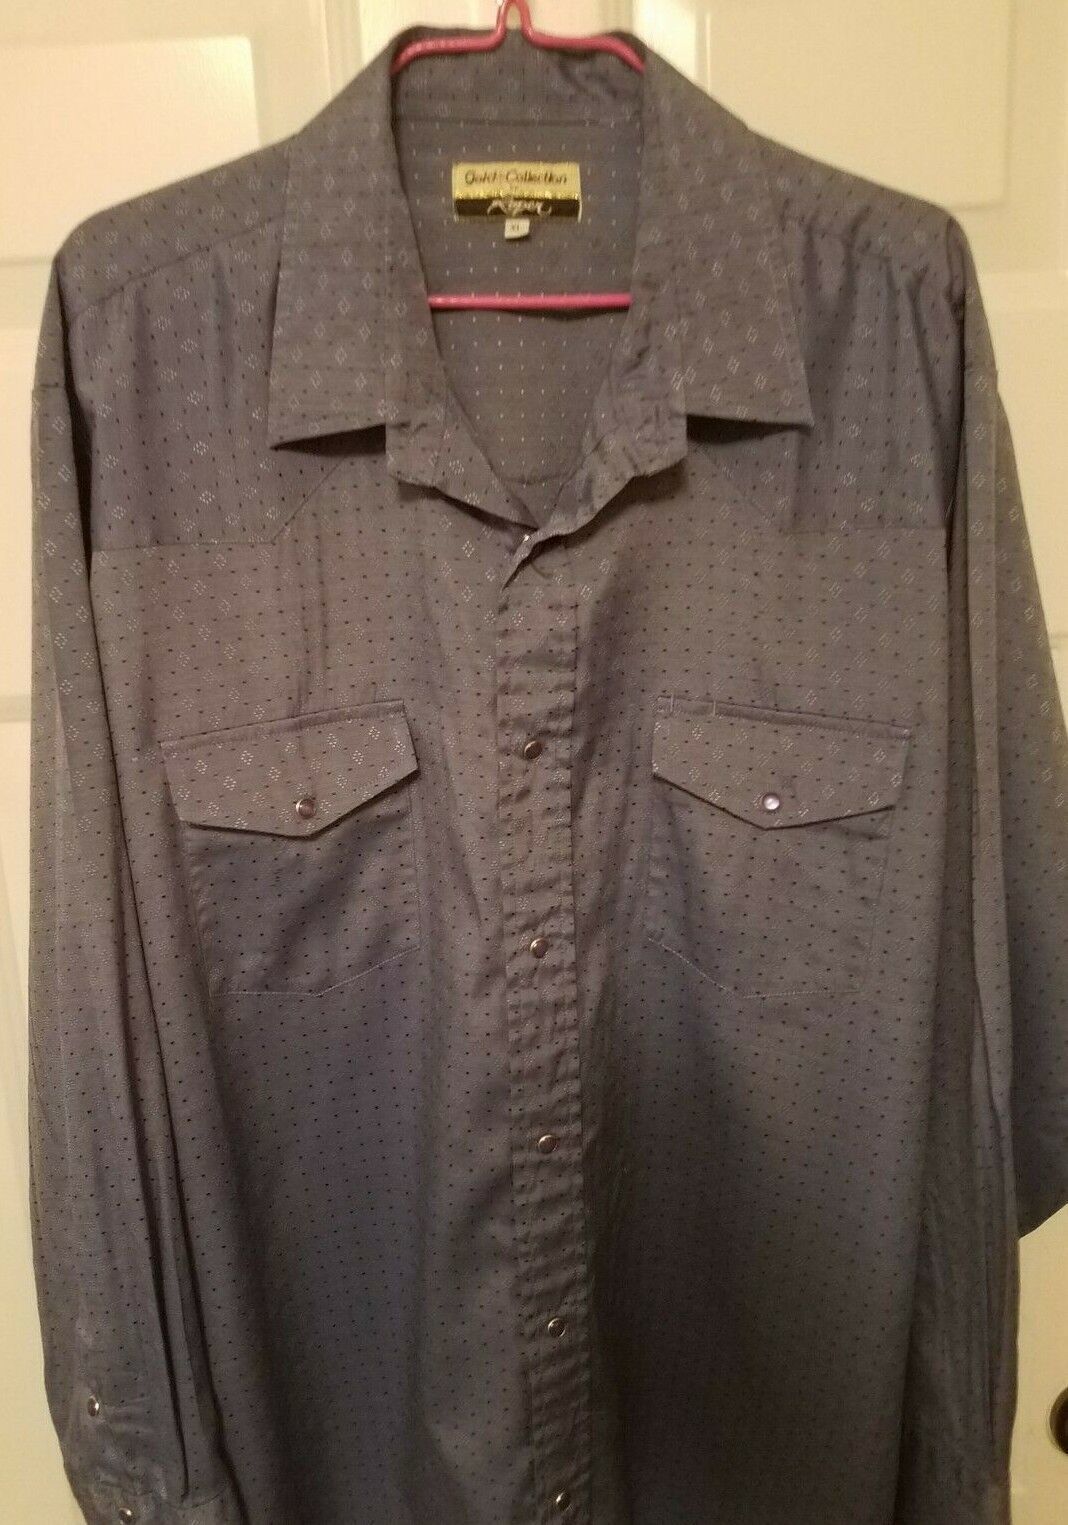 Primary image for Vintage Roper Gold Collection Mens Western Shirt Sz XL Amethyst Snap Cowboy 80's